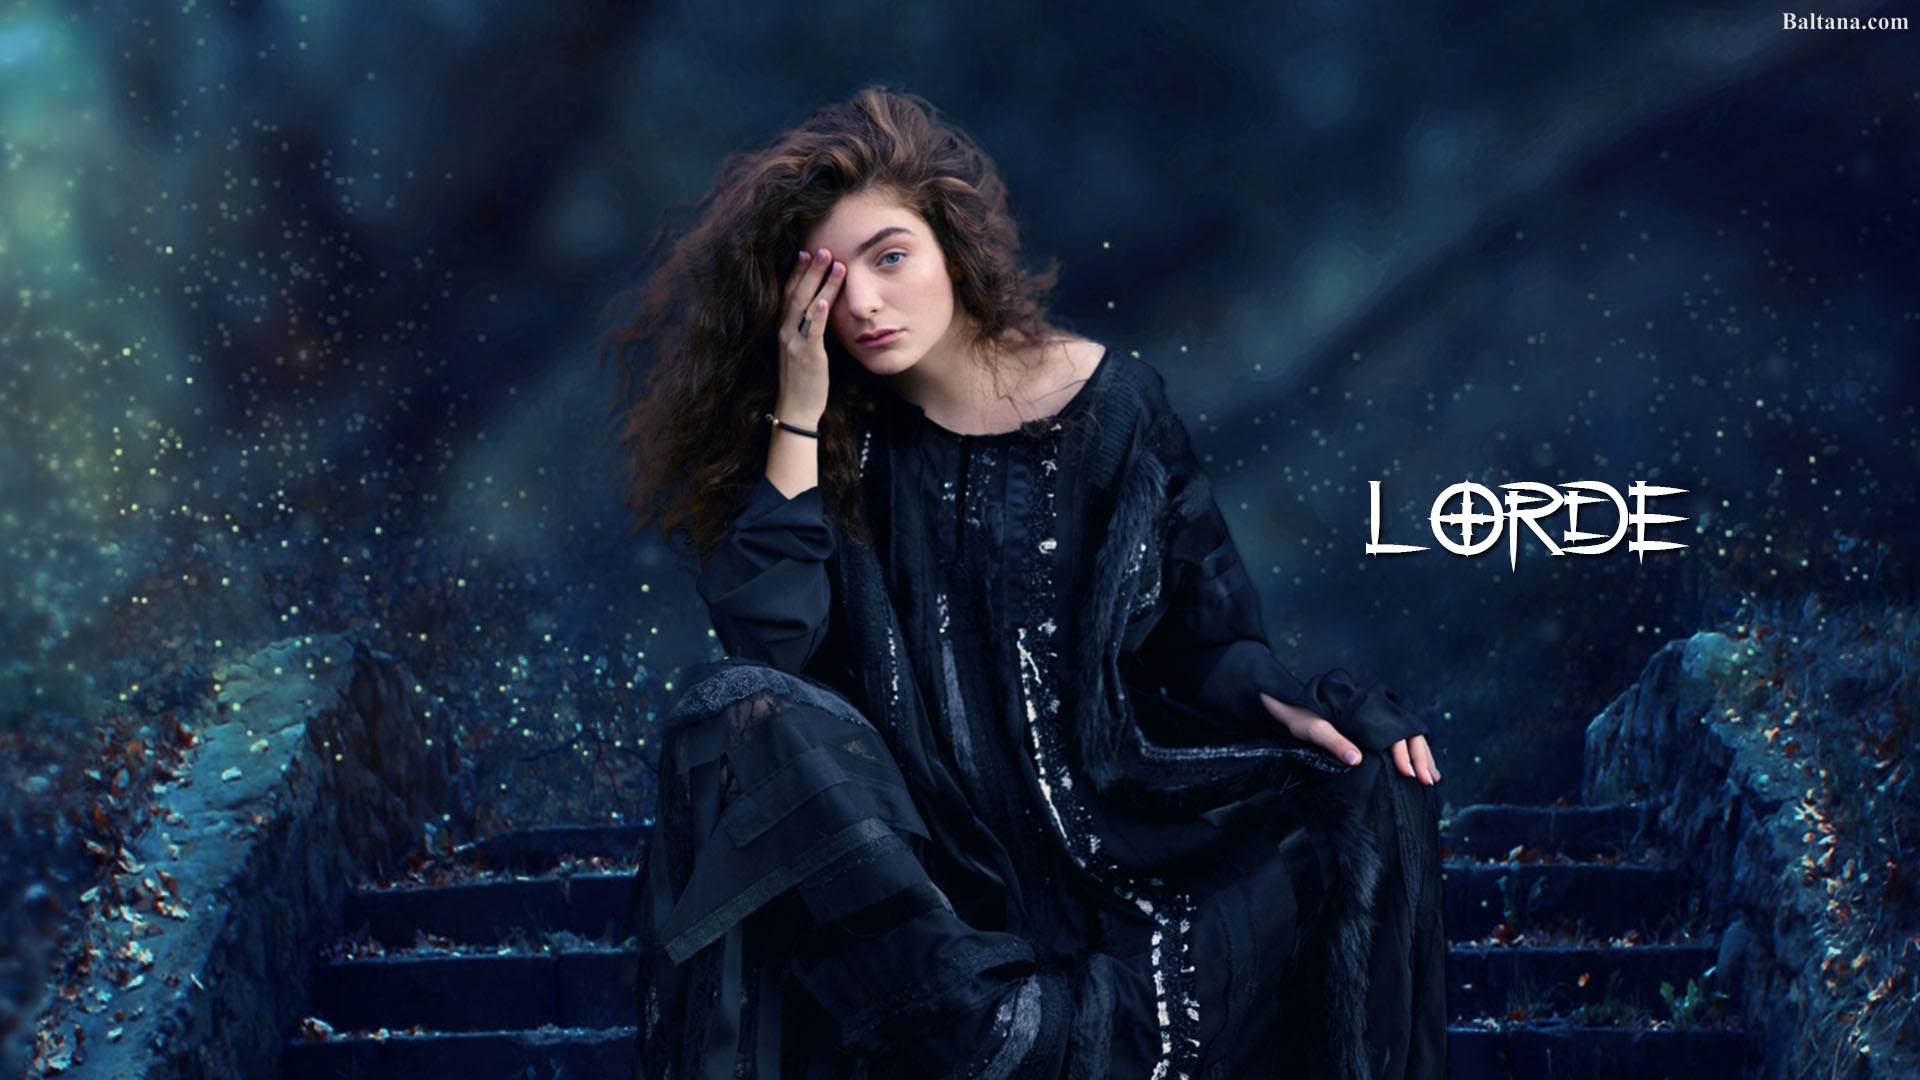 Lorde Wallpaper HD Background Image Pics Photos